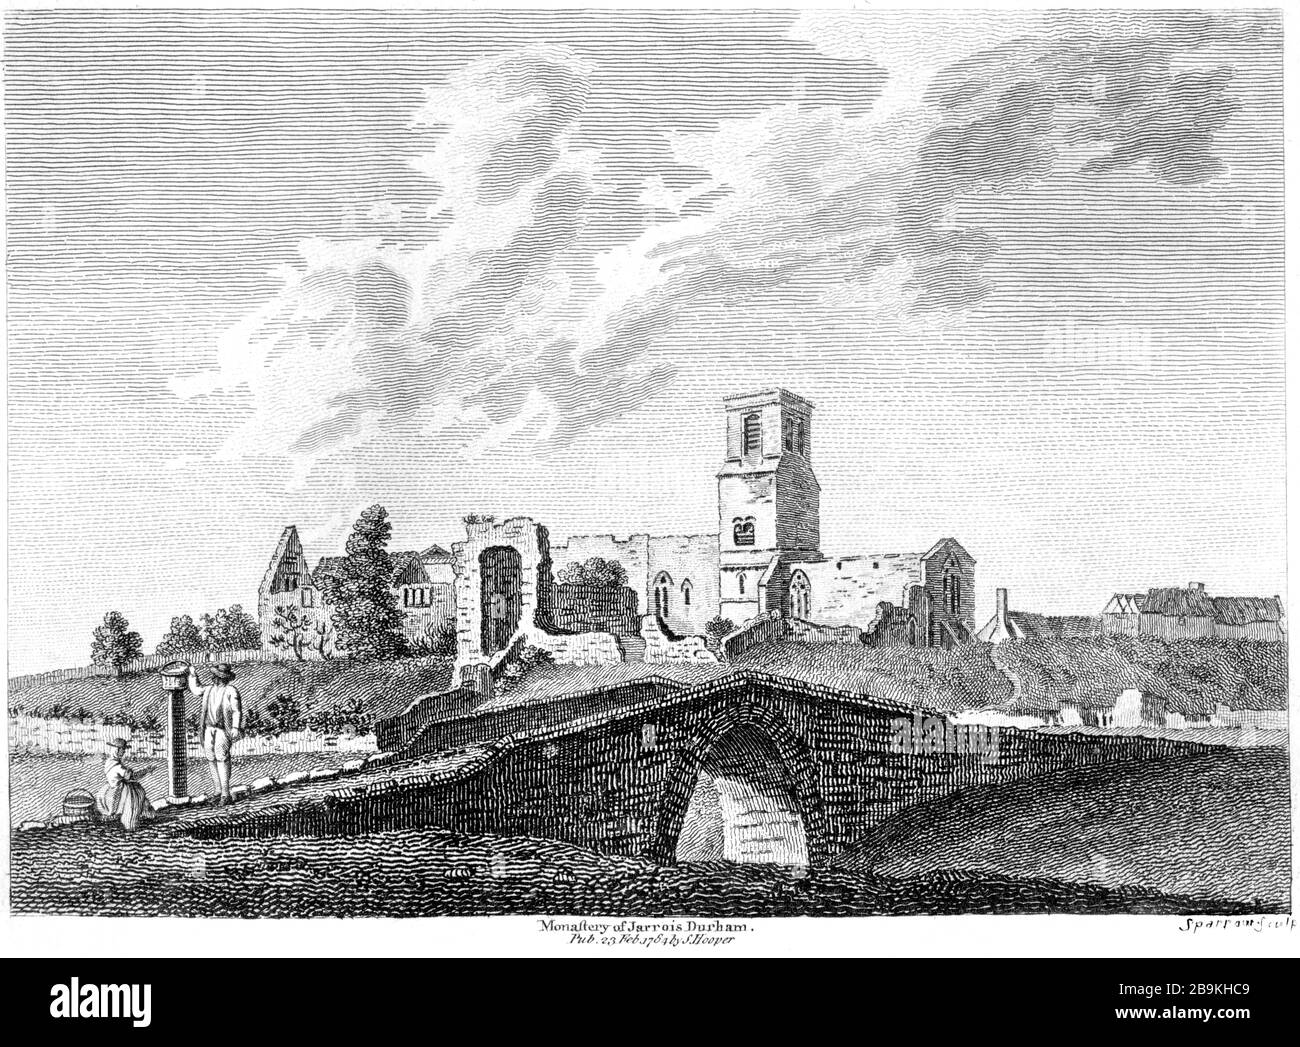 An engraving of Monastery of Jarrois (Jarrow) Durham 1784 scanned at high resolution from a book published around 1786. Believed copyright free. Stock Photo